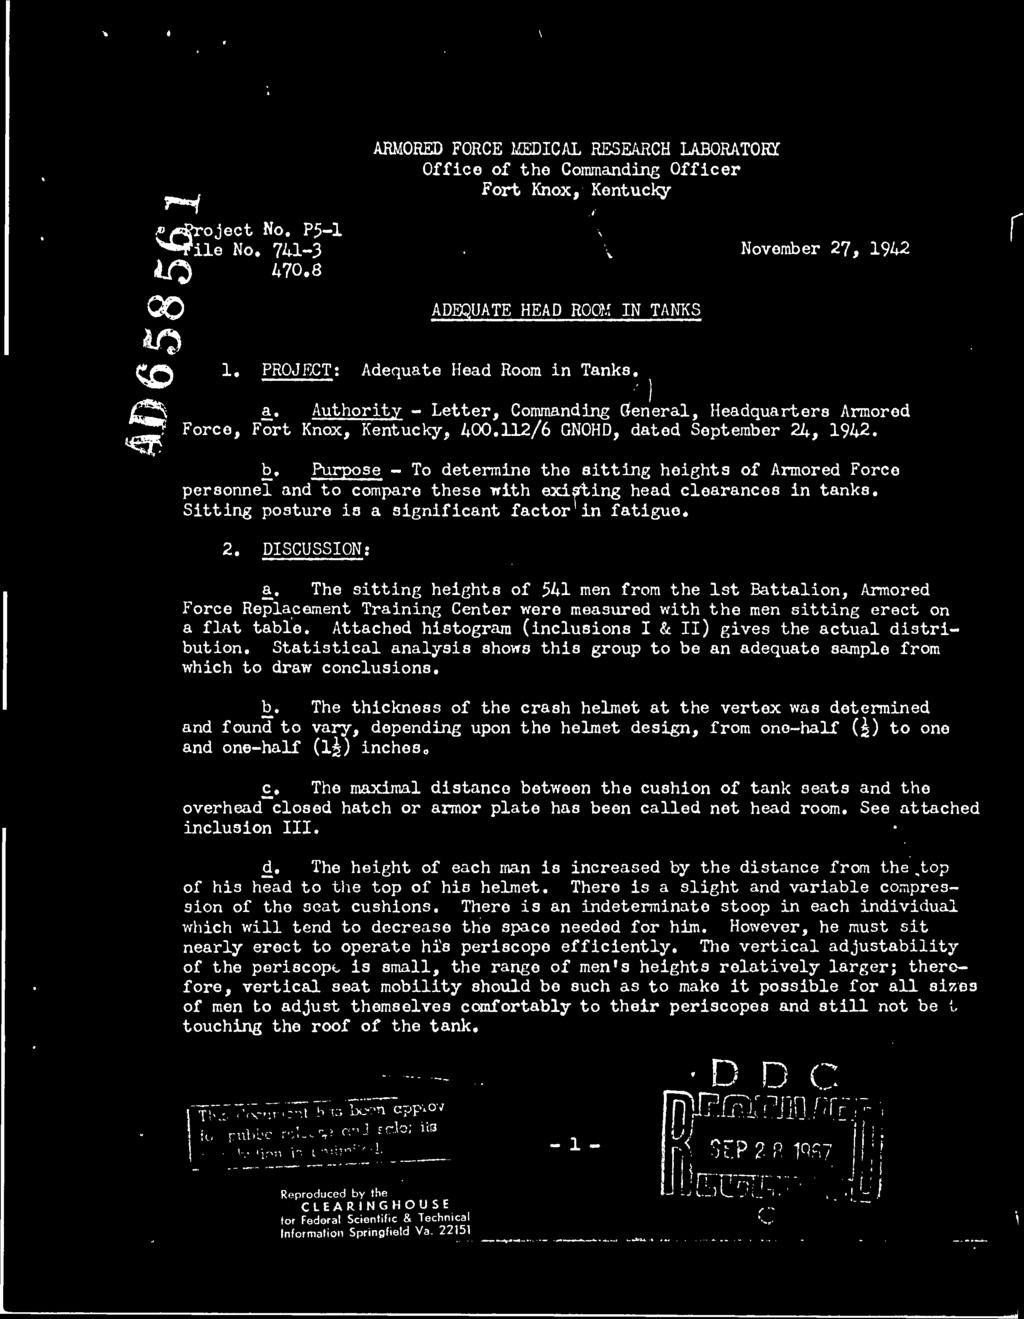 Authorty - Letter, Commandng General, Headquarters Armored Force, Fort Knox, Kentucky, 400.112/6 GNOHD, dated September 24, 1942. r b.